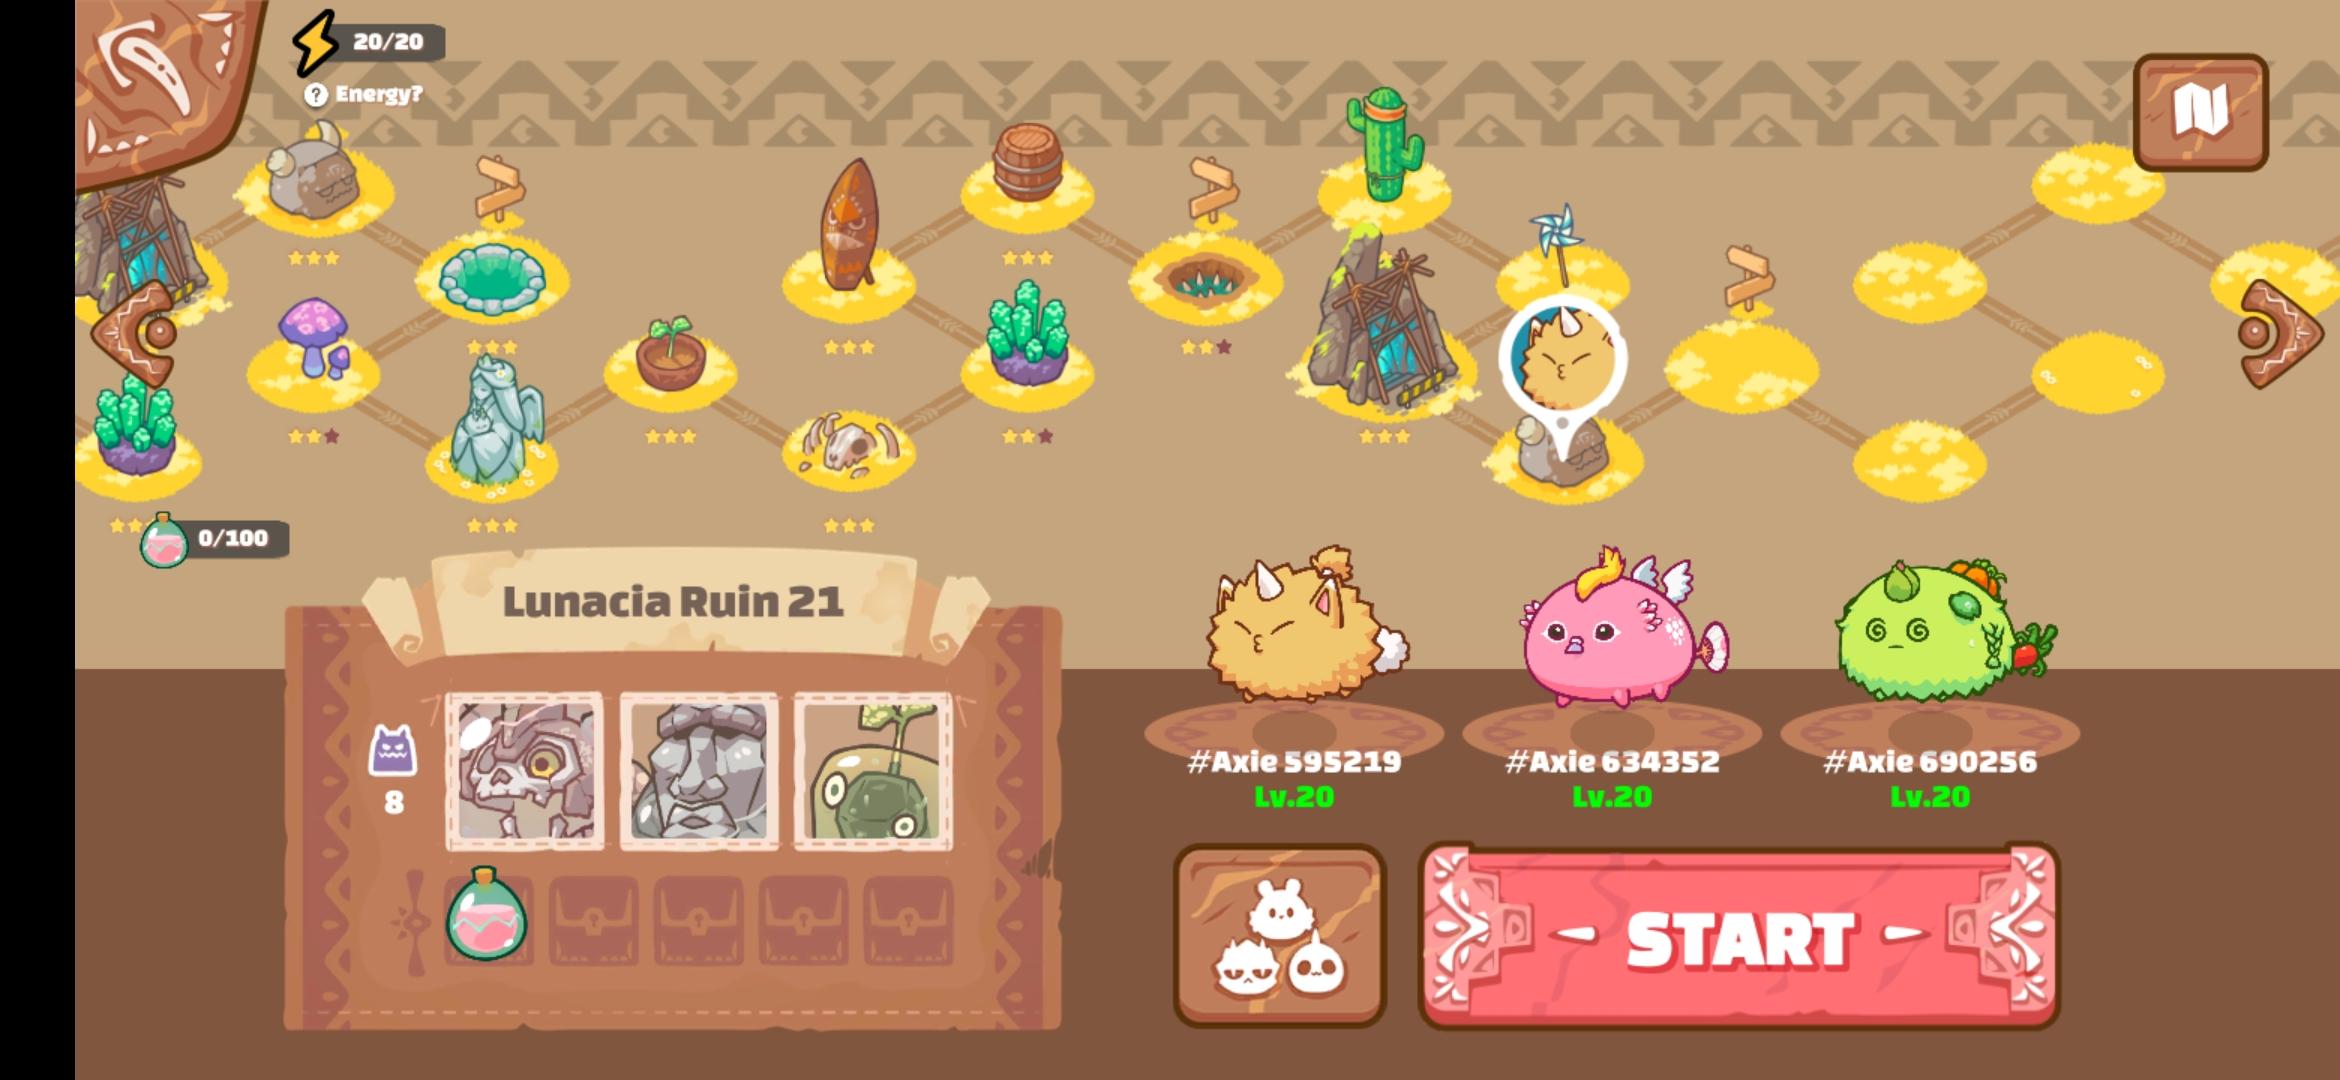 Axie Infinity Game Scholarship For Android Apk Download